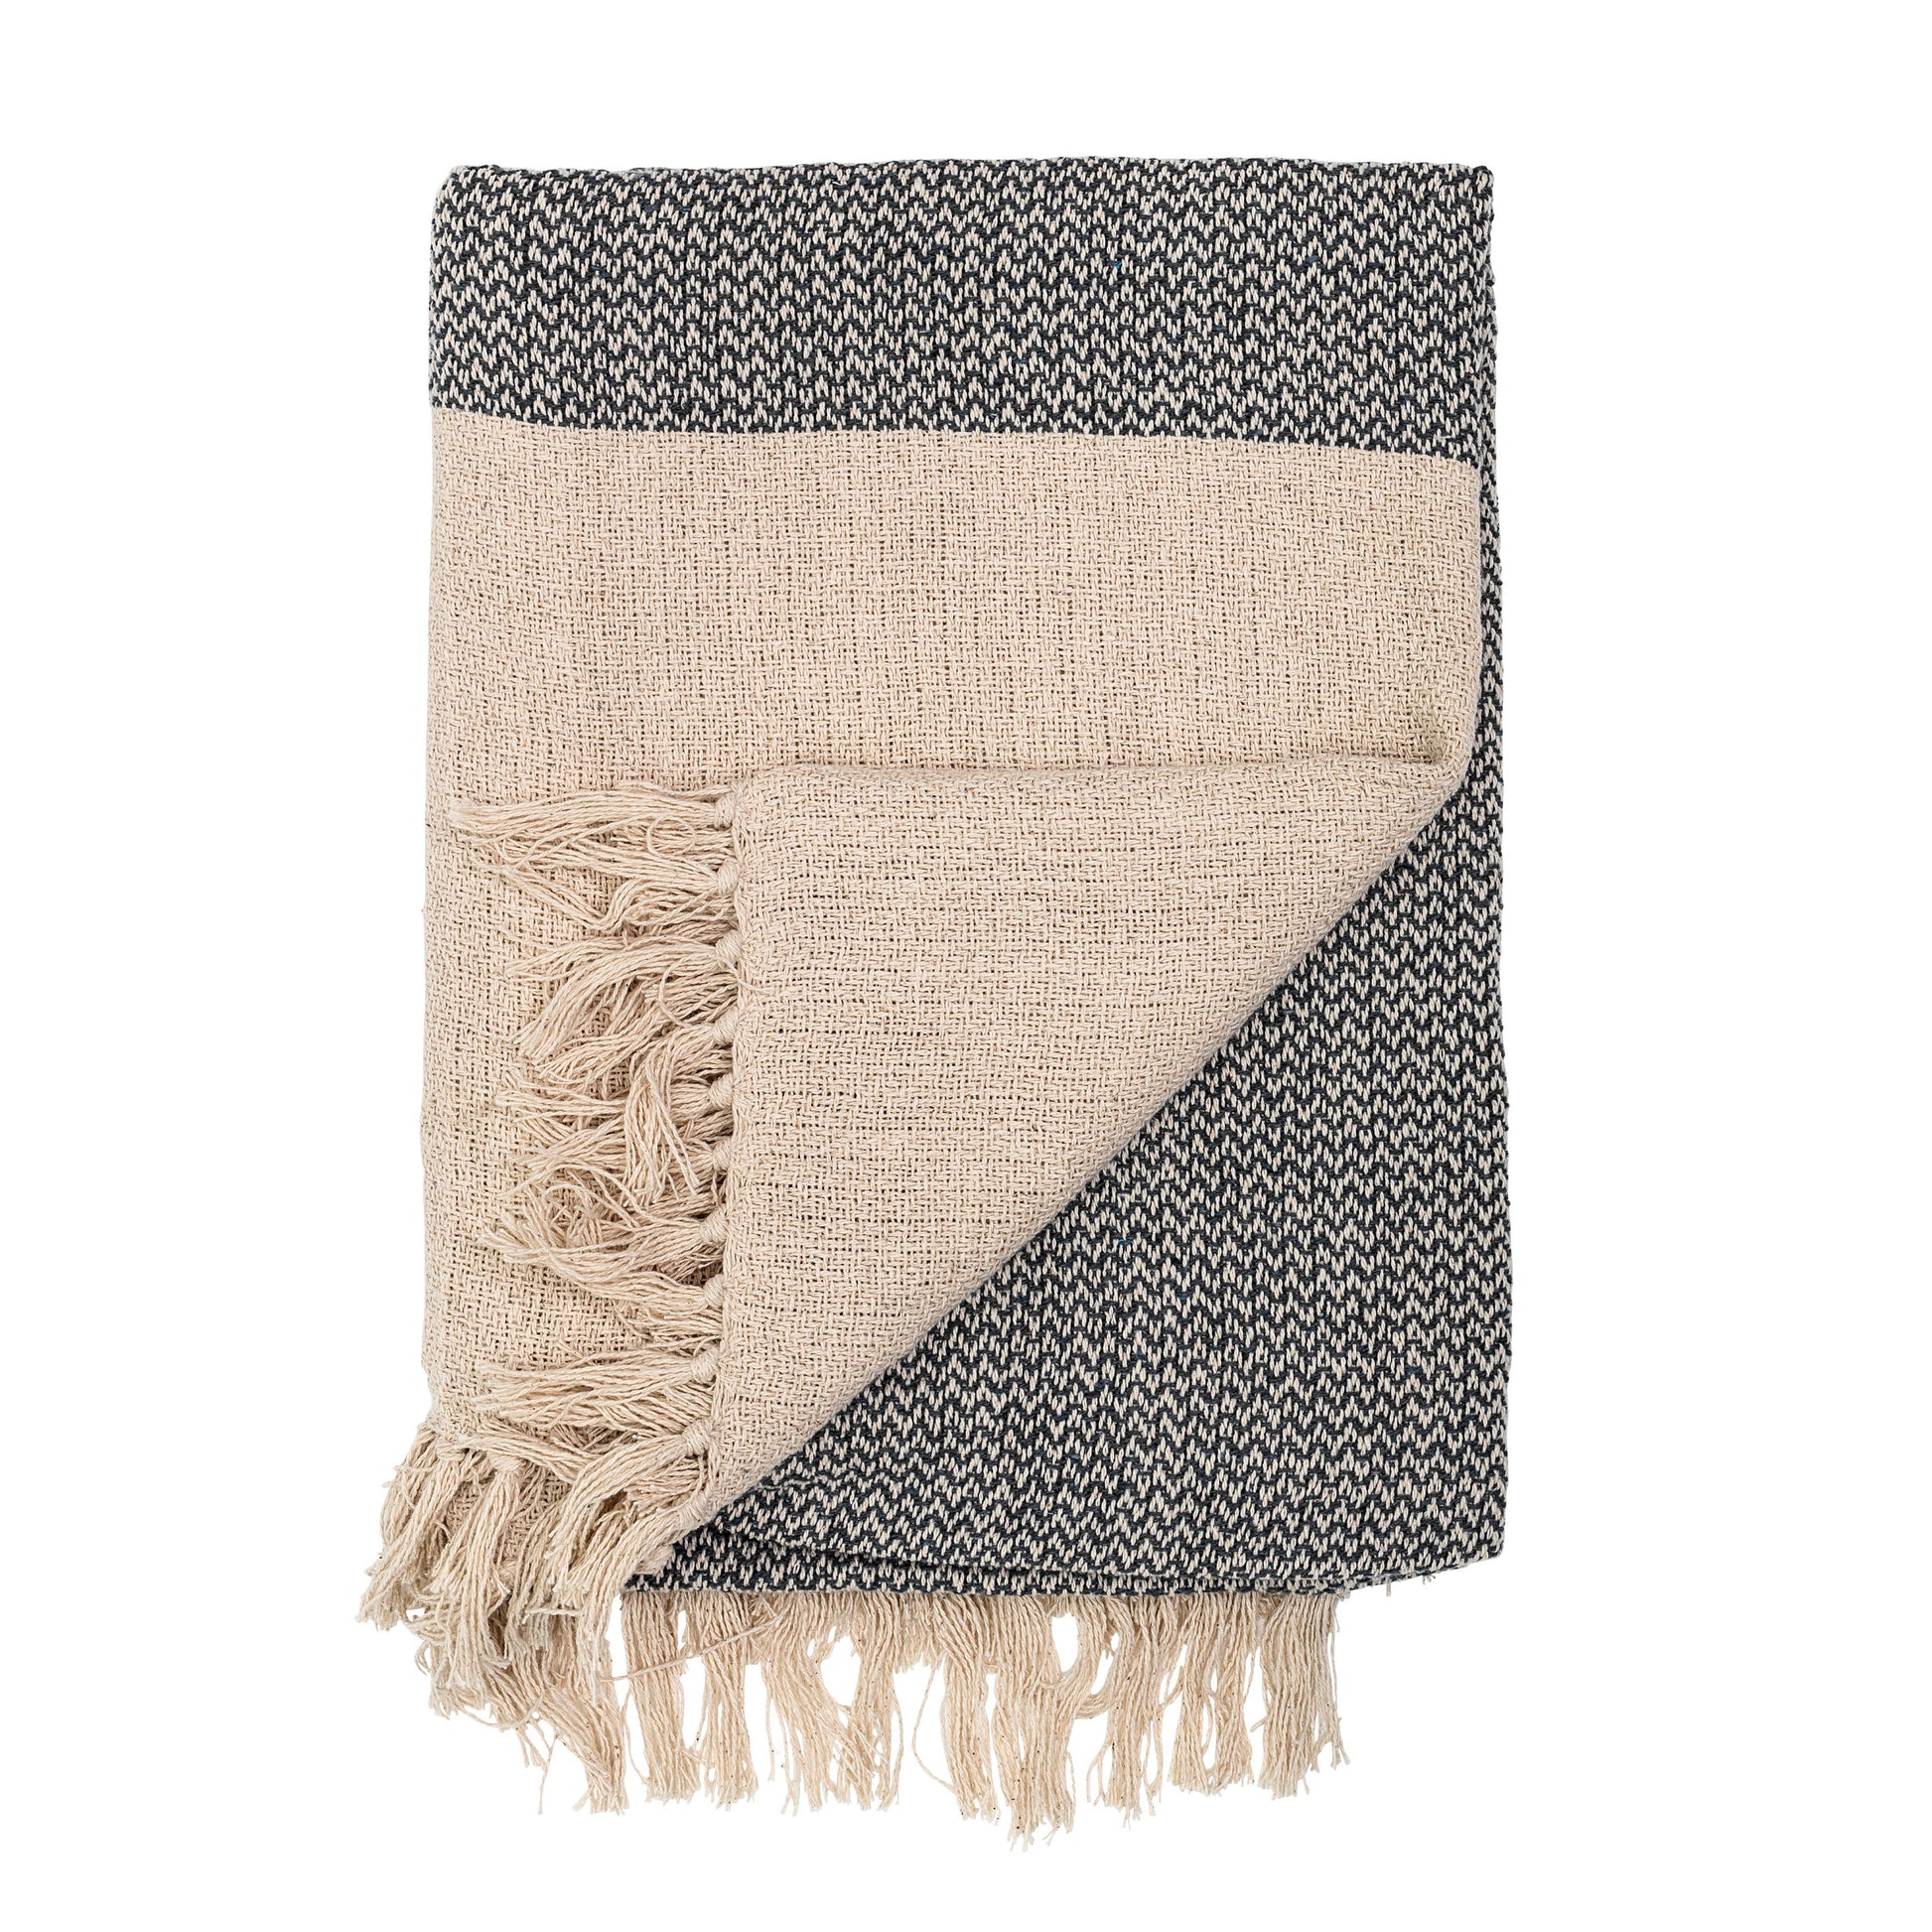 Knit Throw with Fringe: Cozy knit throw with fringe from Grace Blu Shoppe, perfect for snuggling up on the couch or adding texture to your space.